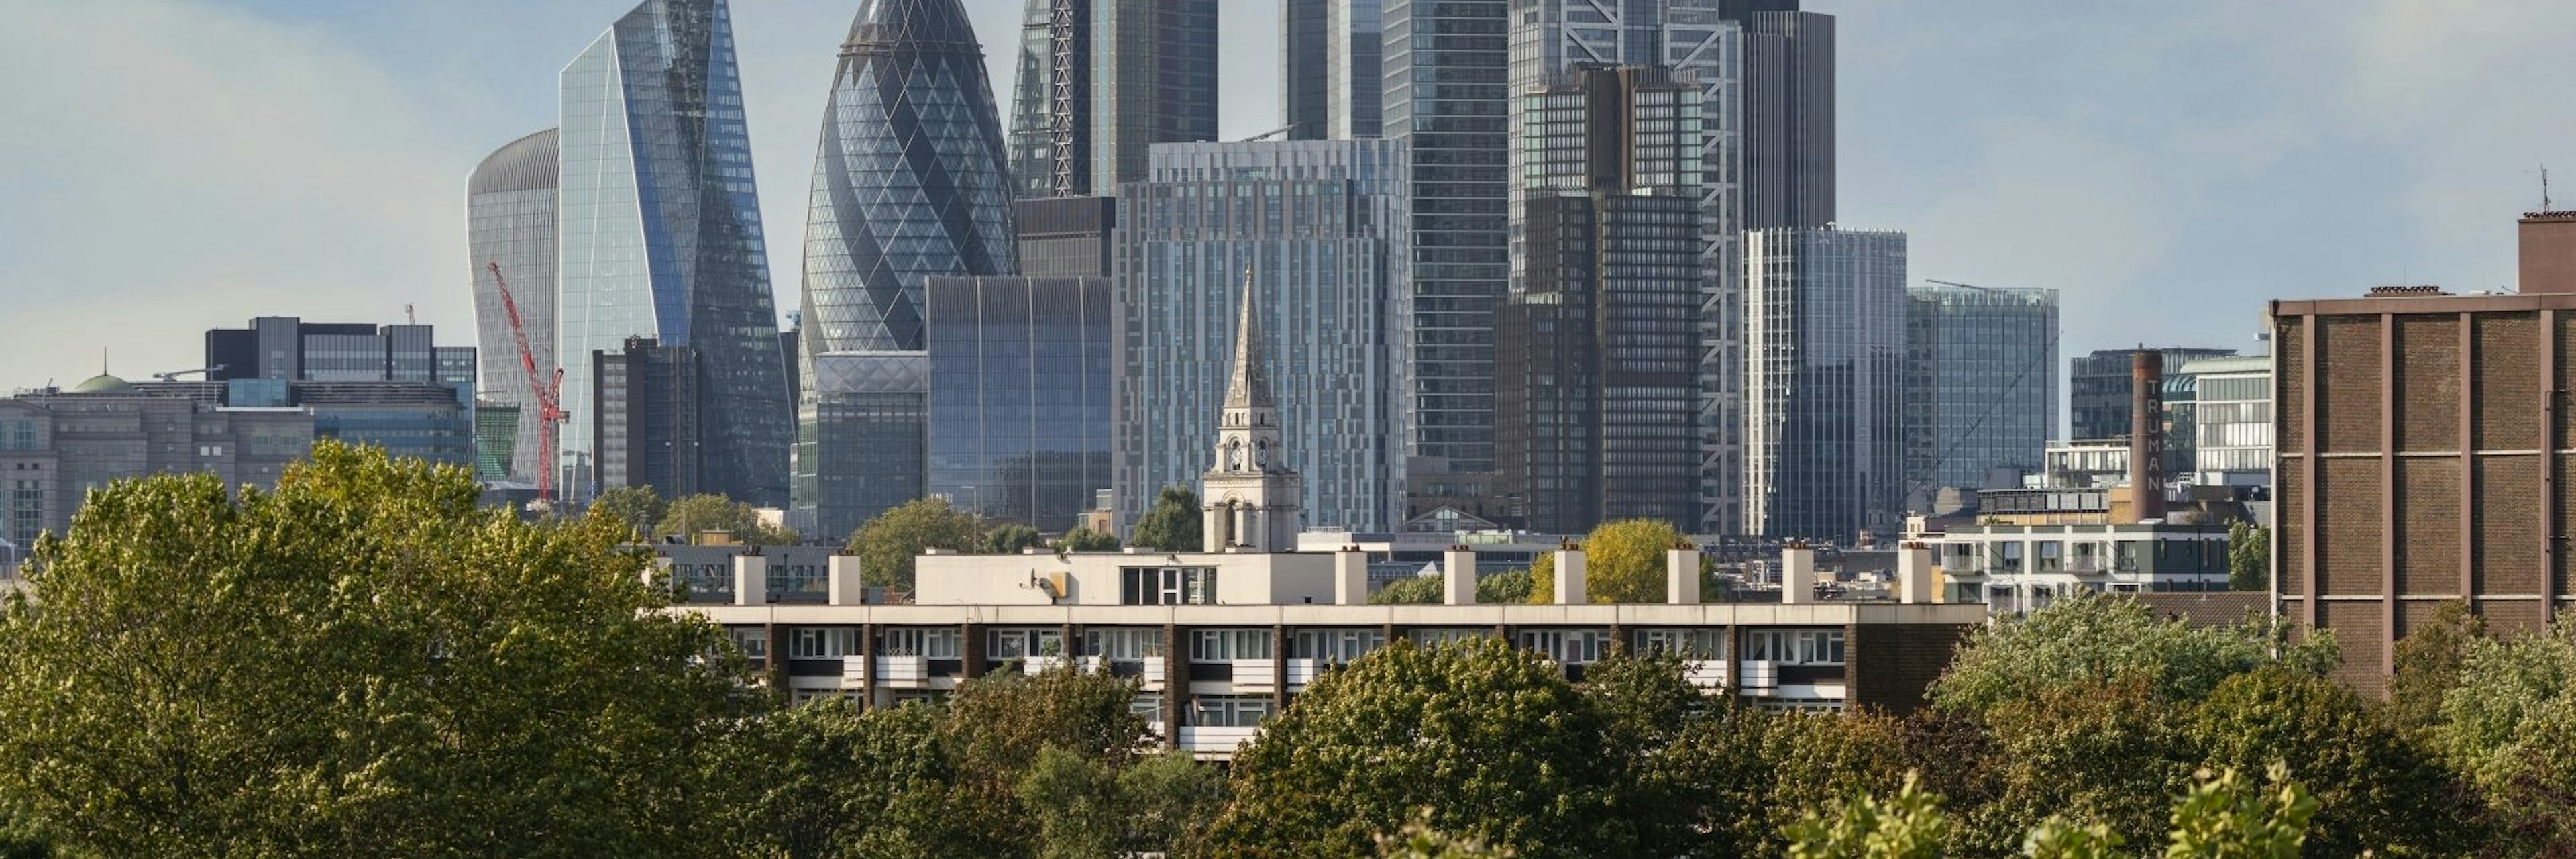 A photo of the skyline of the city of london